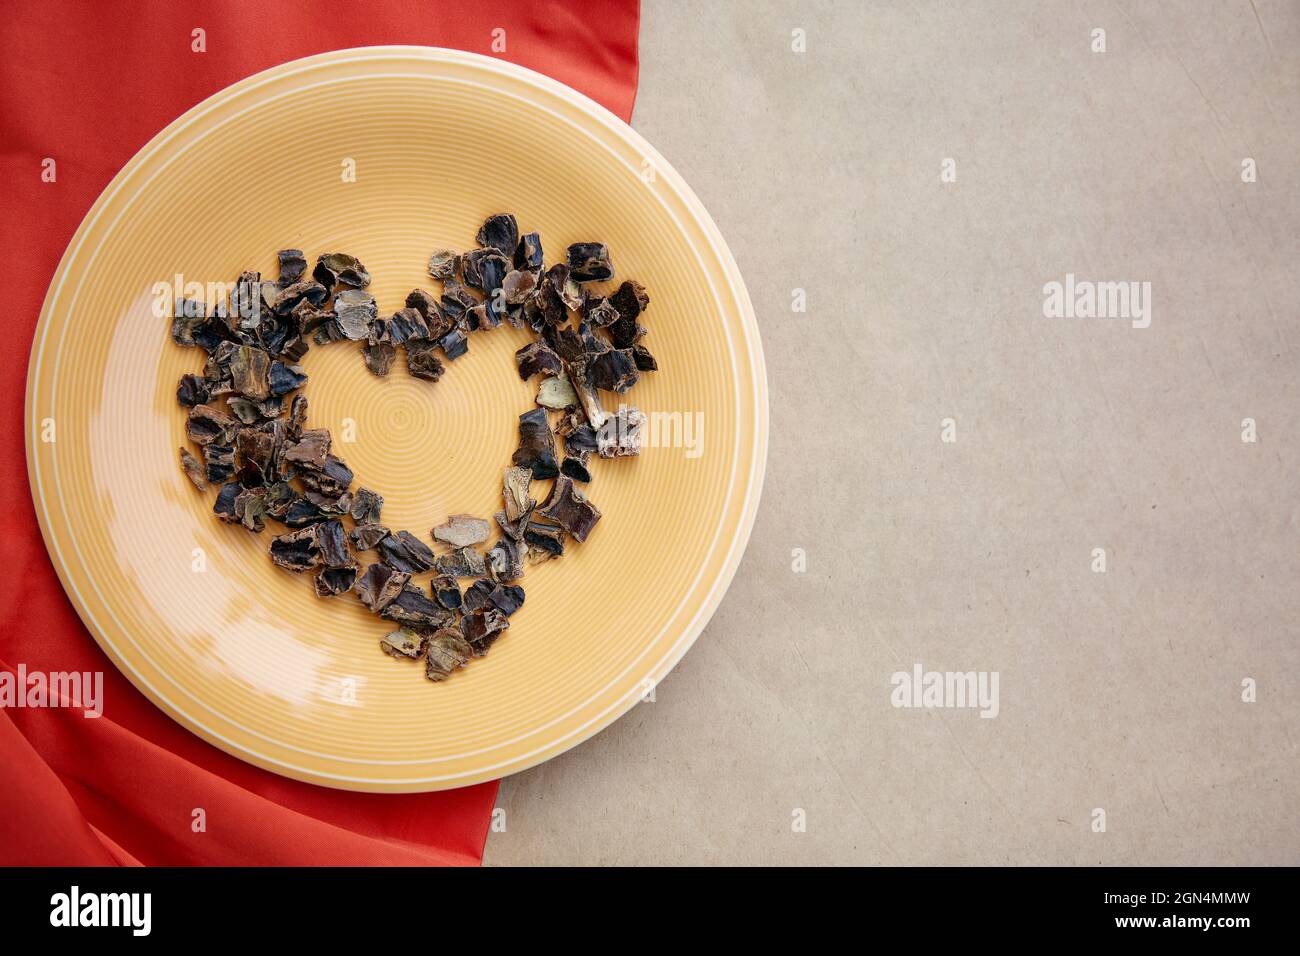 Carob in shape of heart symbol of coffee alternative - natural product on the plate. Organic plant-based caffeine antioxidants. Top view, copy space. High quality photo Stock Photo